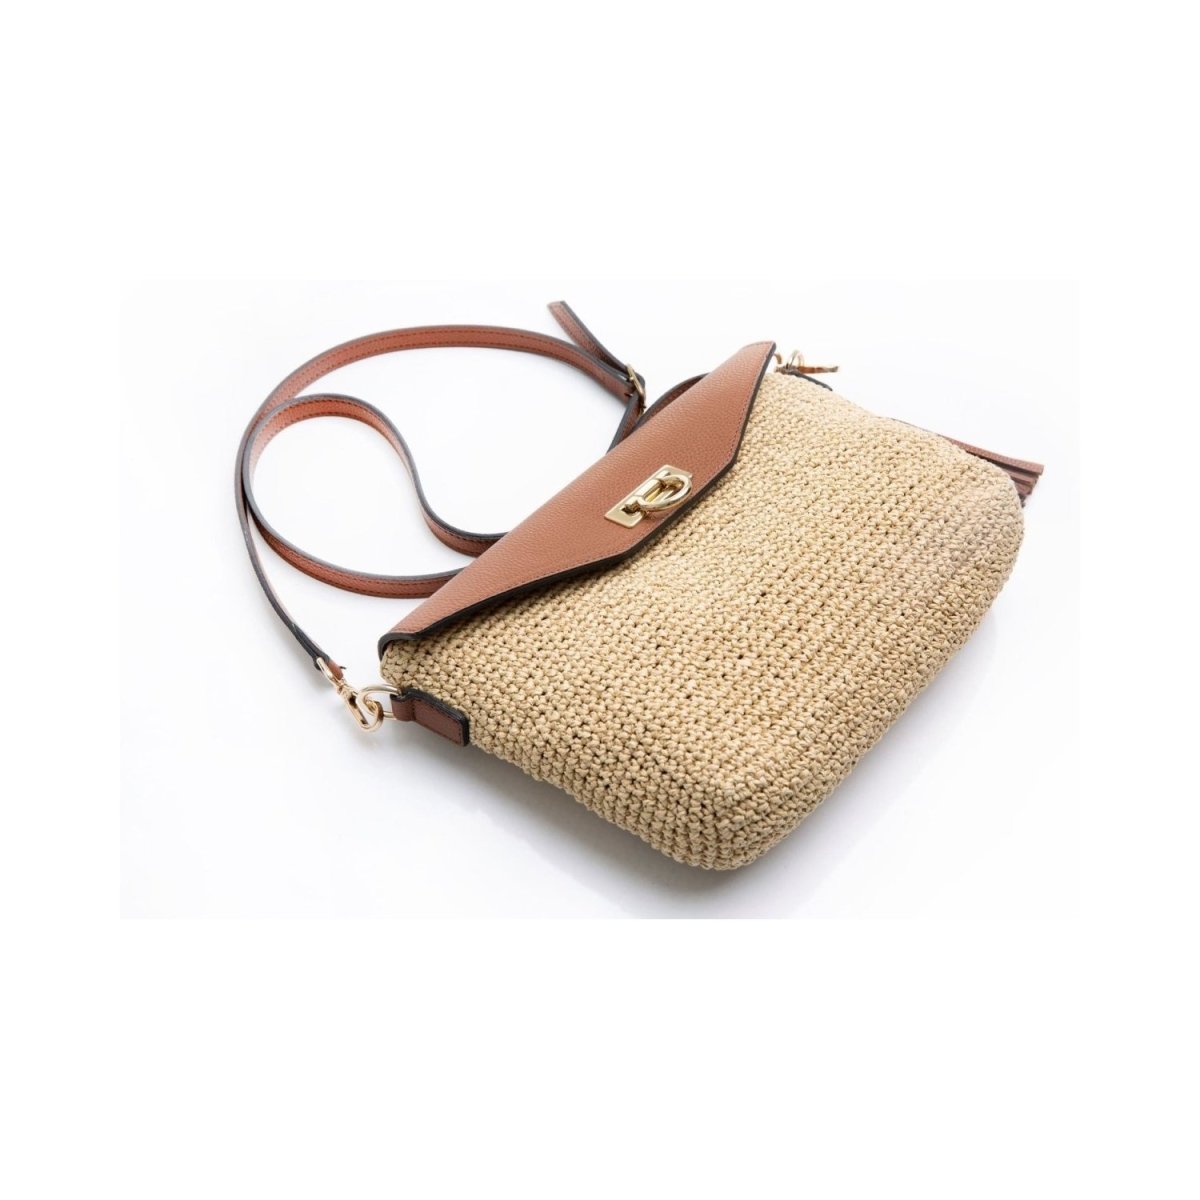 Handmade Knitted Cross Body Bag with Leather Strap - Ozzell London